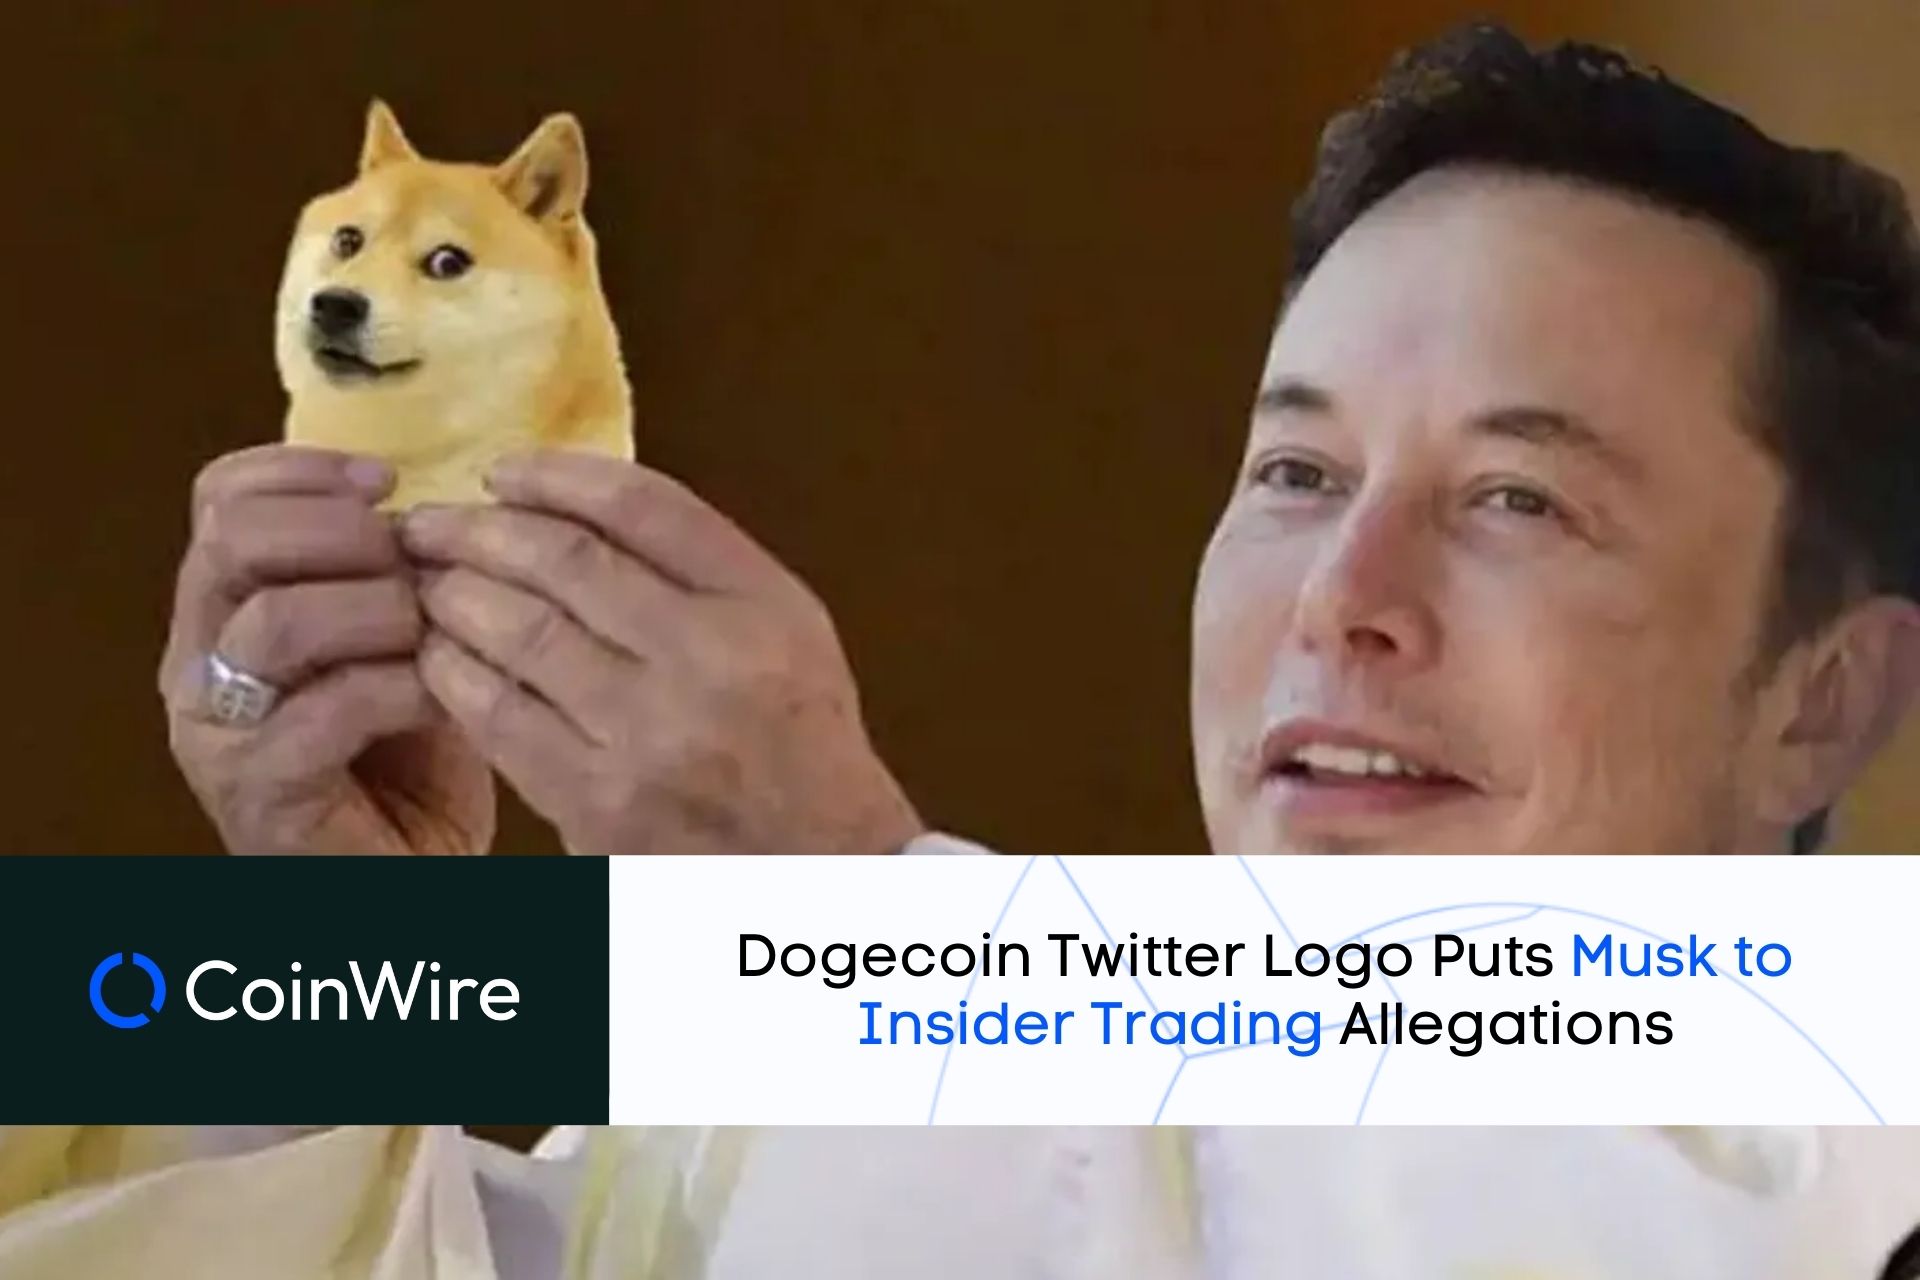 Dogecoin Twitter Logo Puts Musk To Insider Trading Allegations